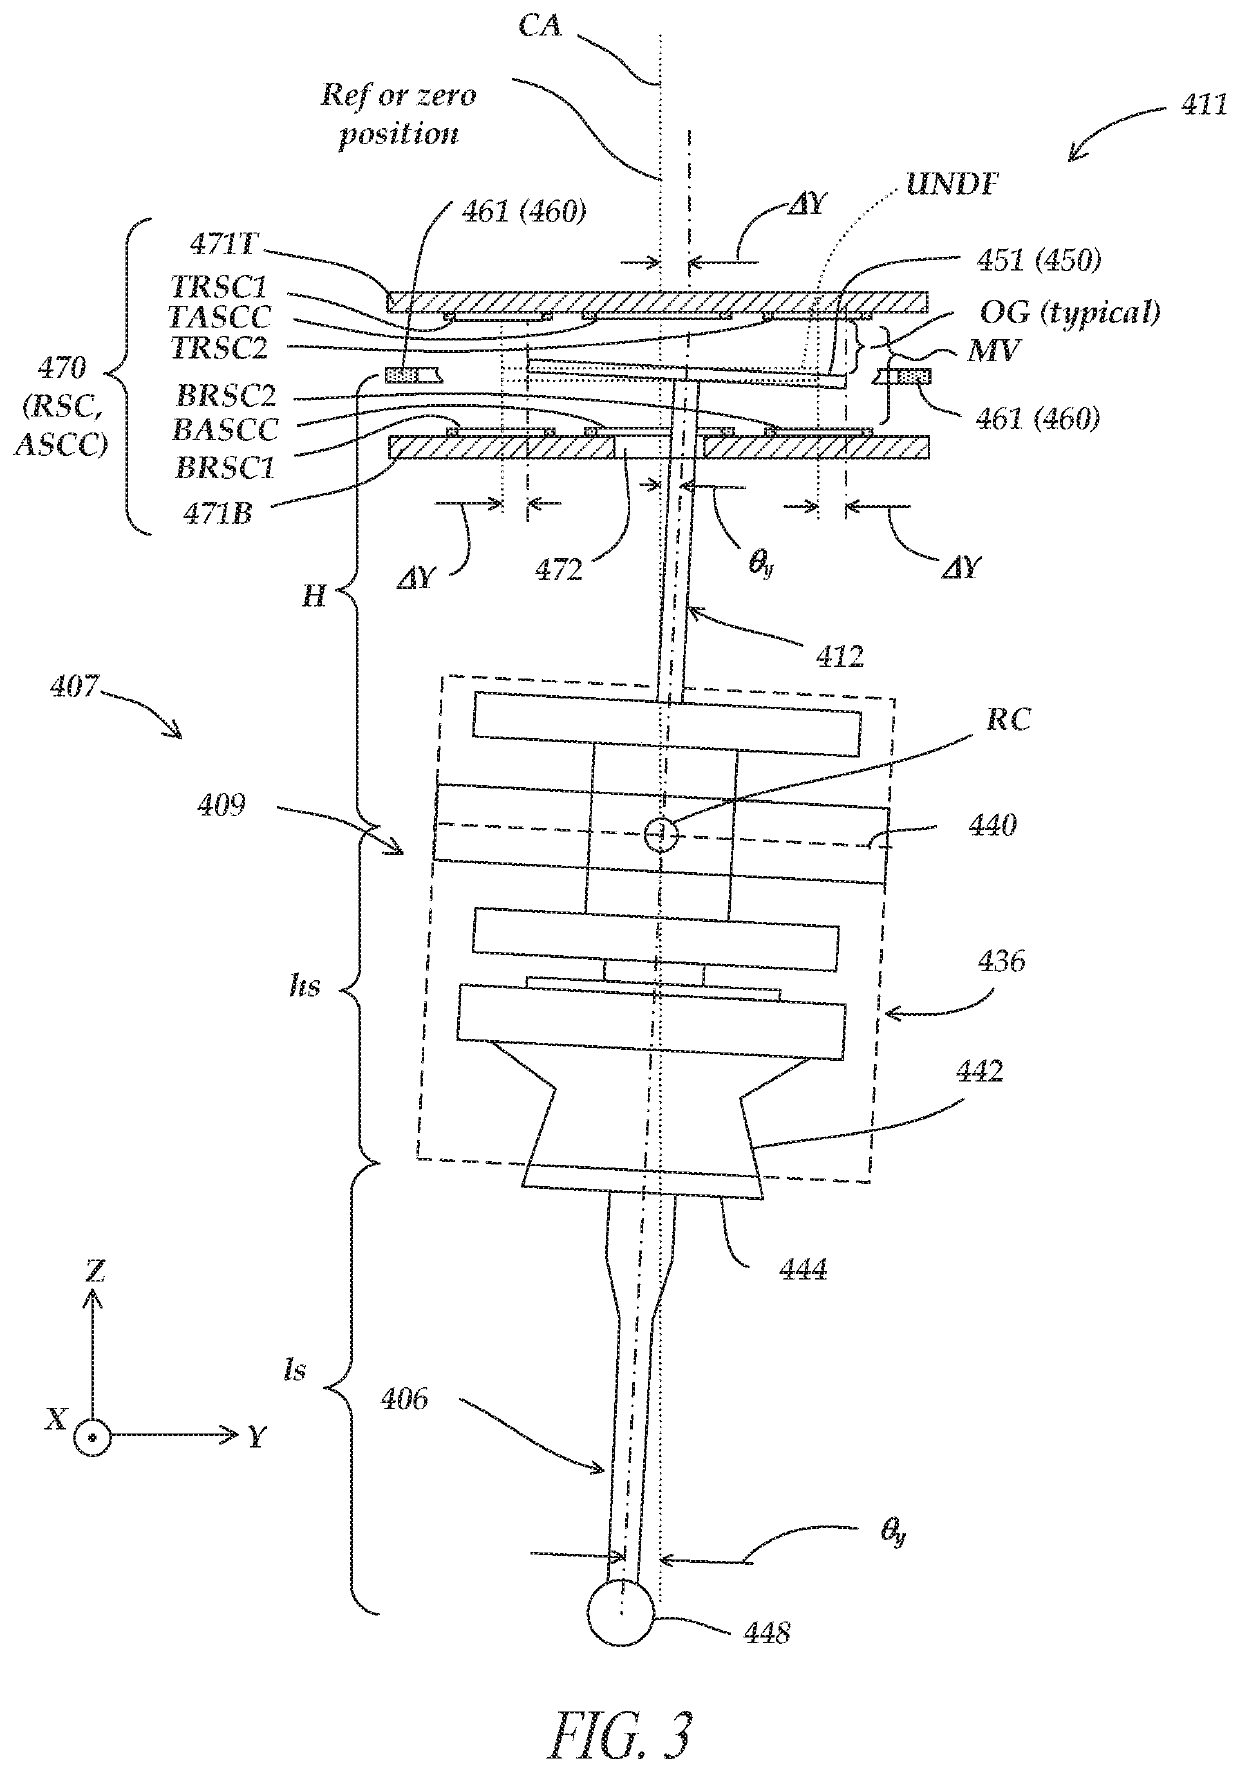 Inductive position detection configuration for indicating a measurement device stylus position